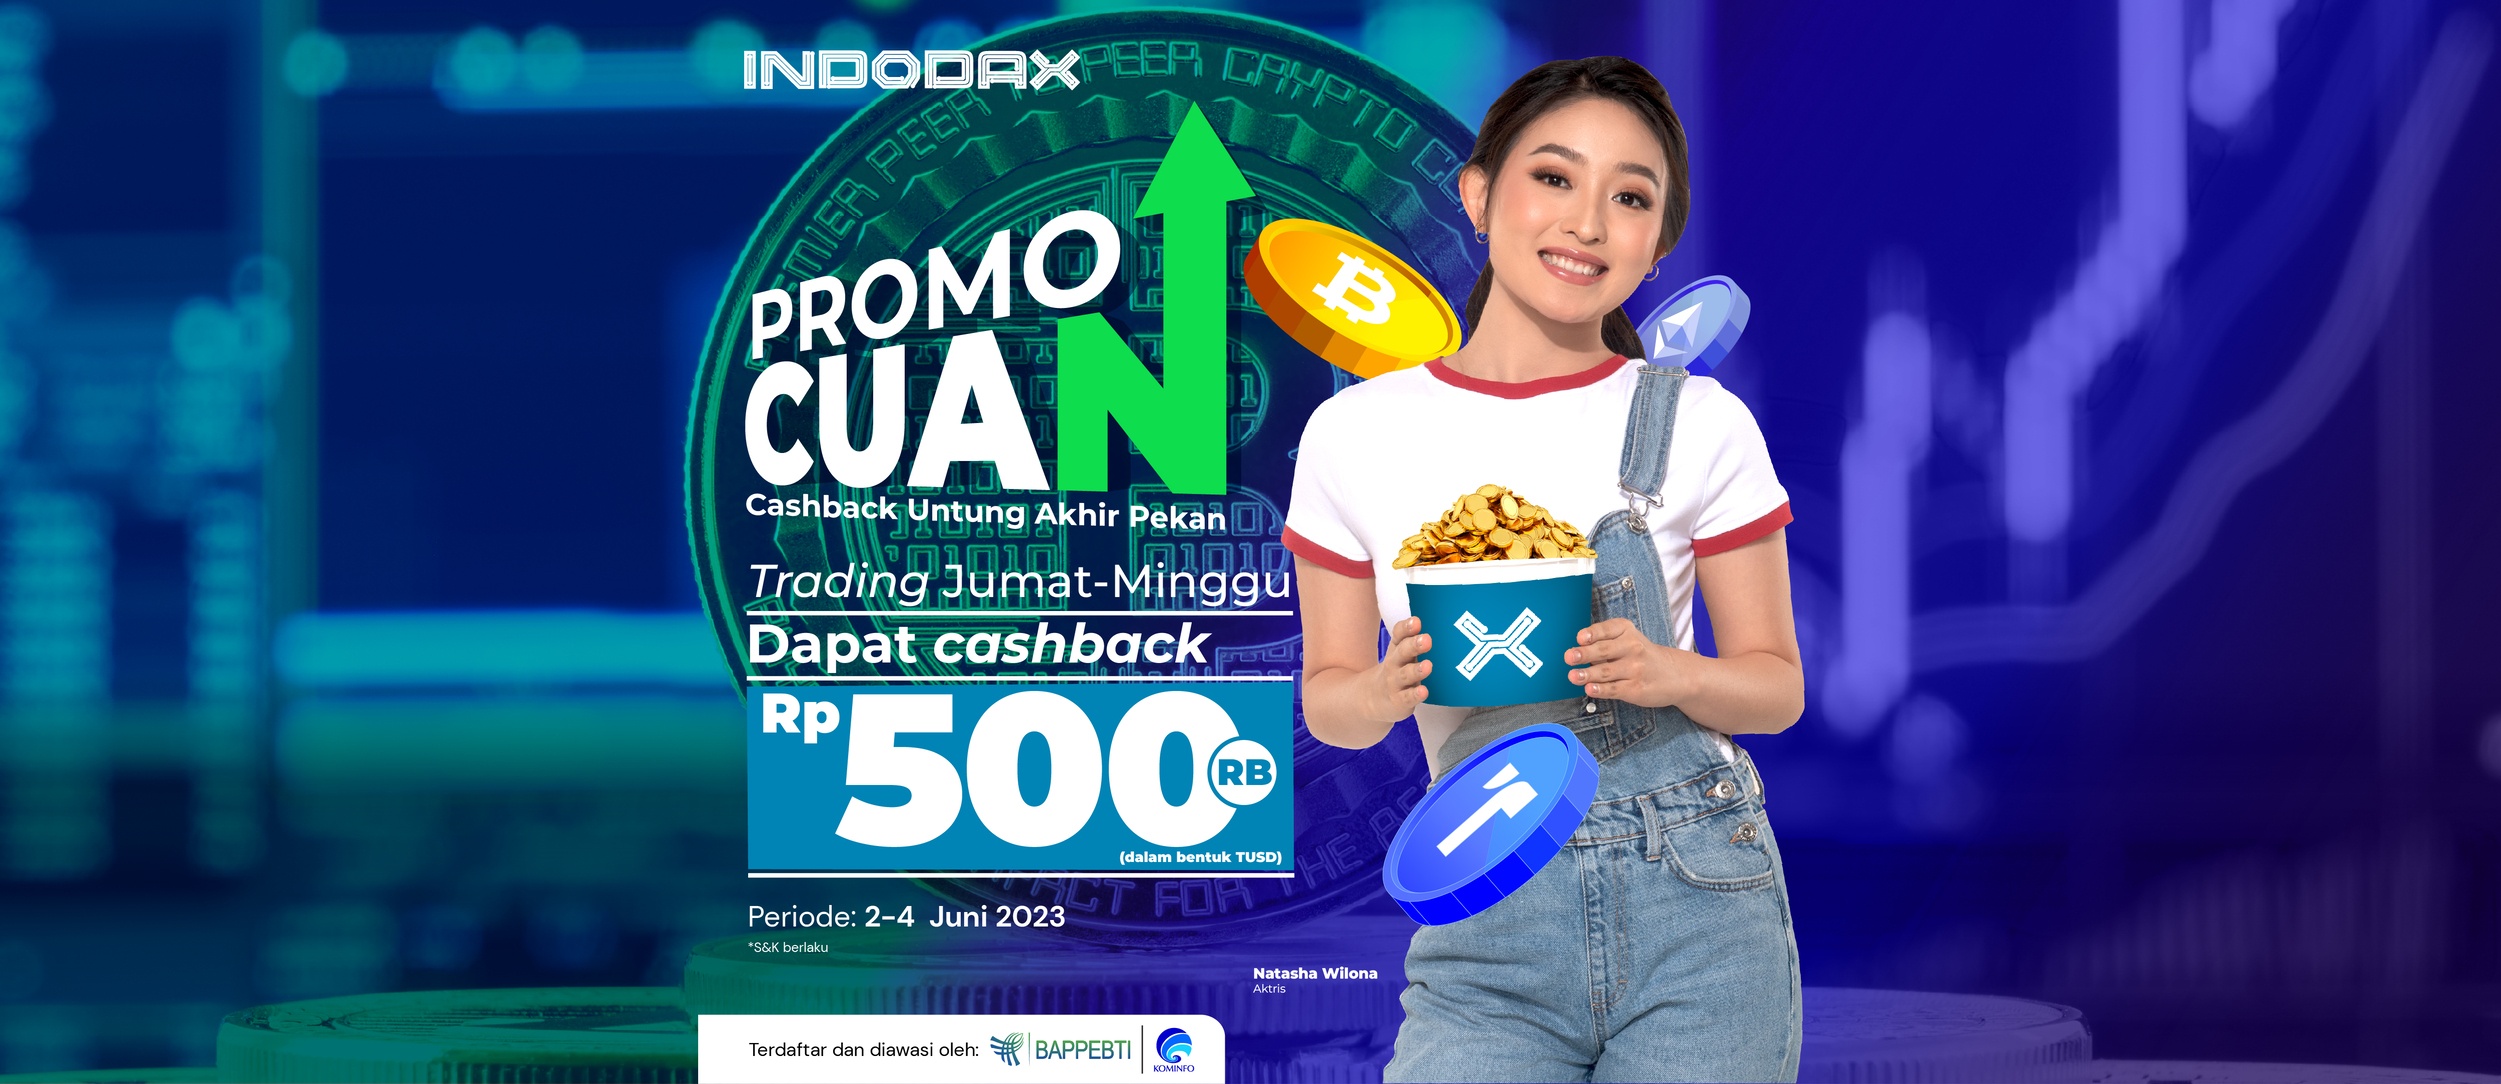 Having Extra profits during the weekend? Just trade as much as possible on INDODAX! Grab the chance to receive a cashback from INDODAX worth Rp500,000 in the form of TUSD  by doing as much trade as possible during this weekend within the Promo Cashback Untung Akhir Pekan period.